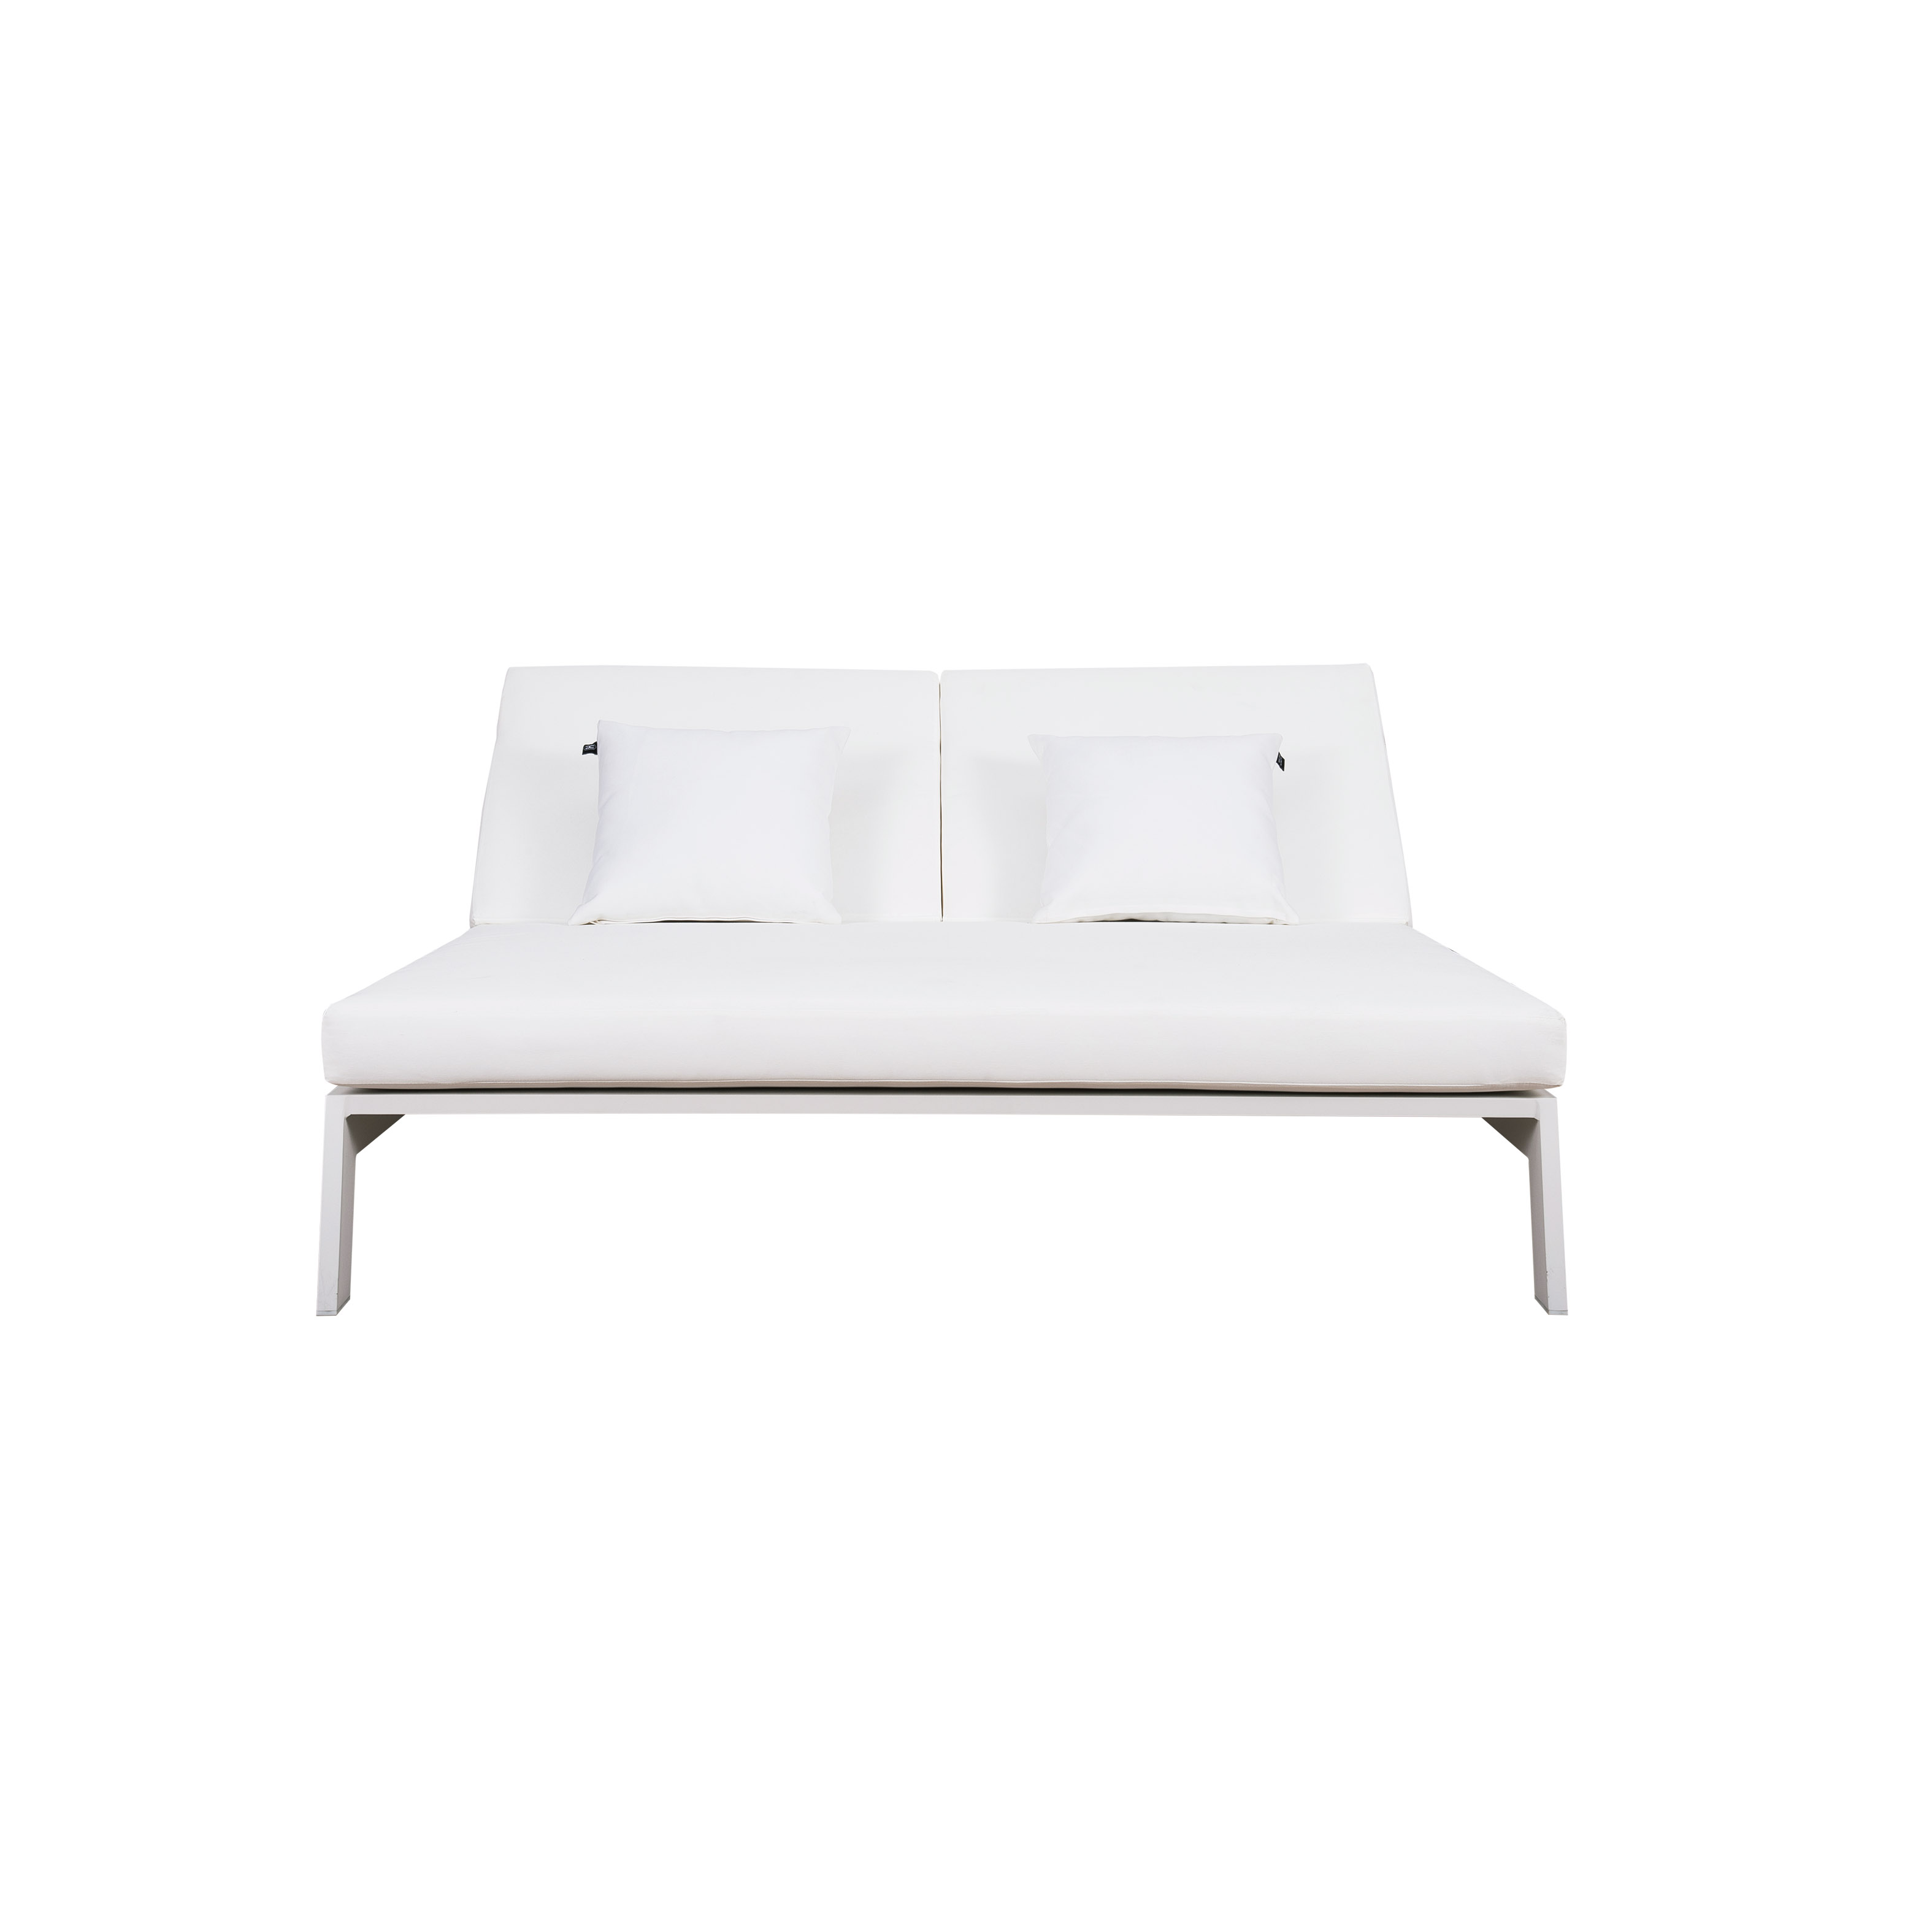 Casa alu.double daybed S7